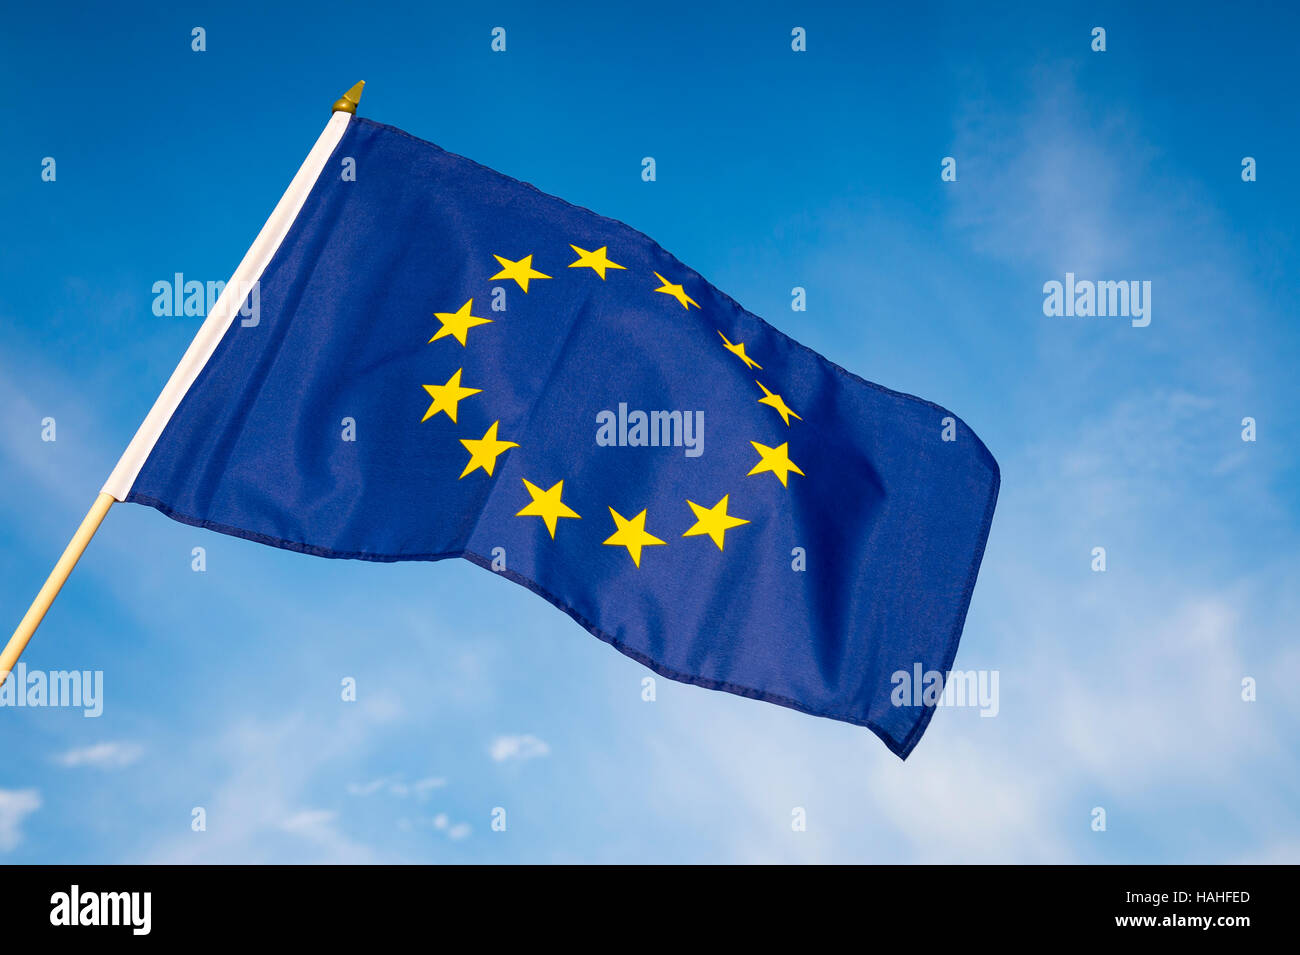 European Union flag flying in front of bright blue sky Stock Photo